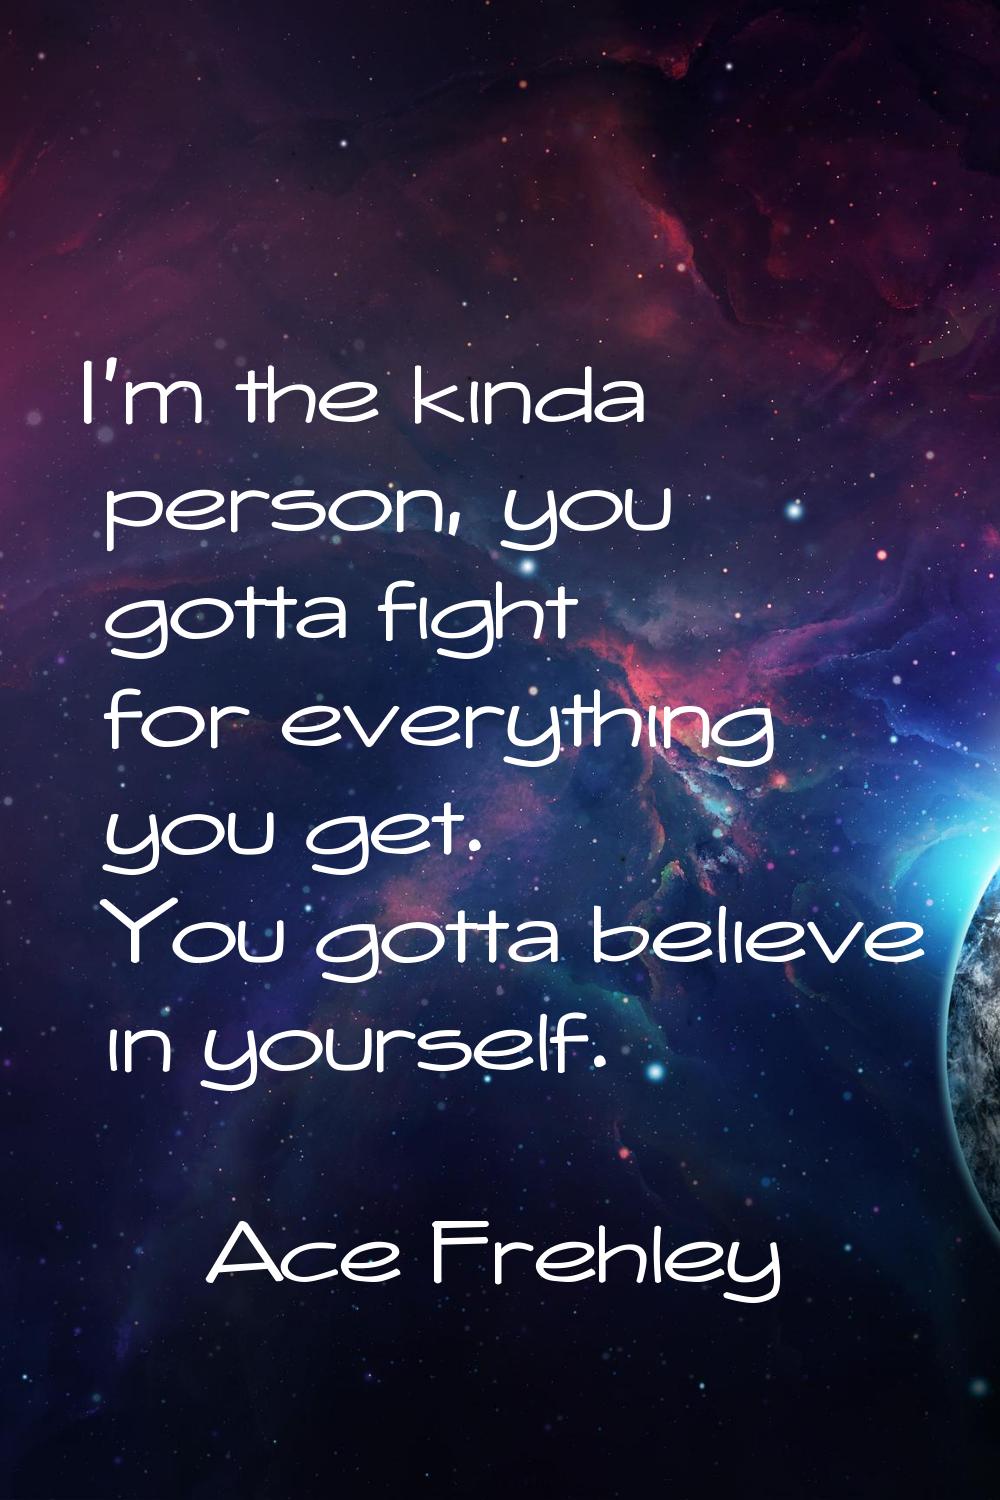 I'm the kinda person, you gotta fight for everything you get. You gotta believe in yourself.